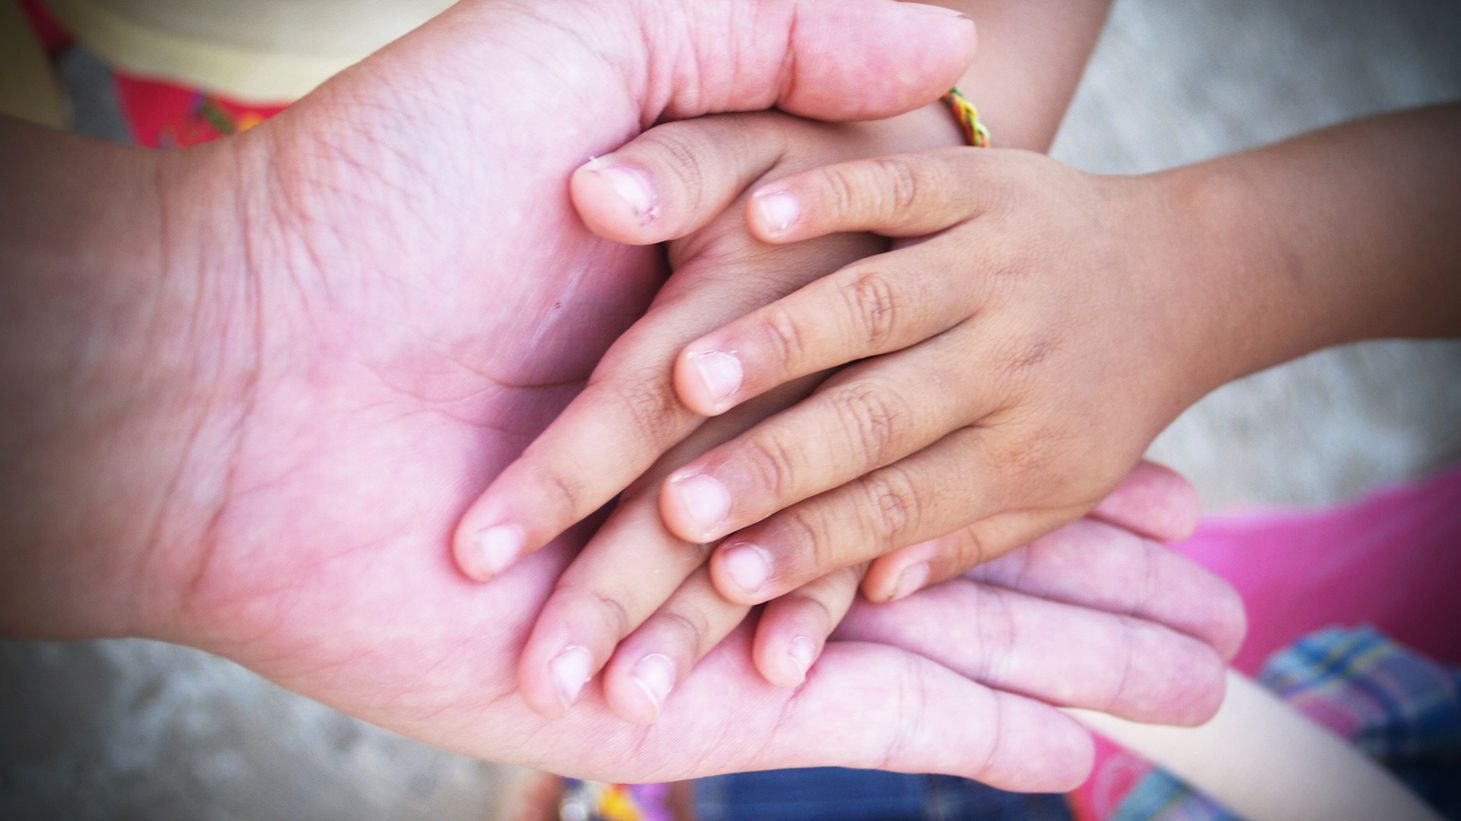 5 easy ways to teach children compassion and empathy